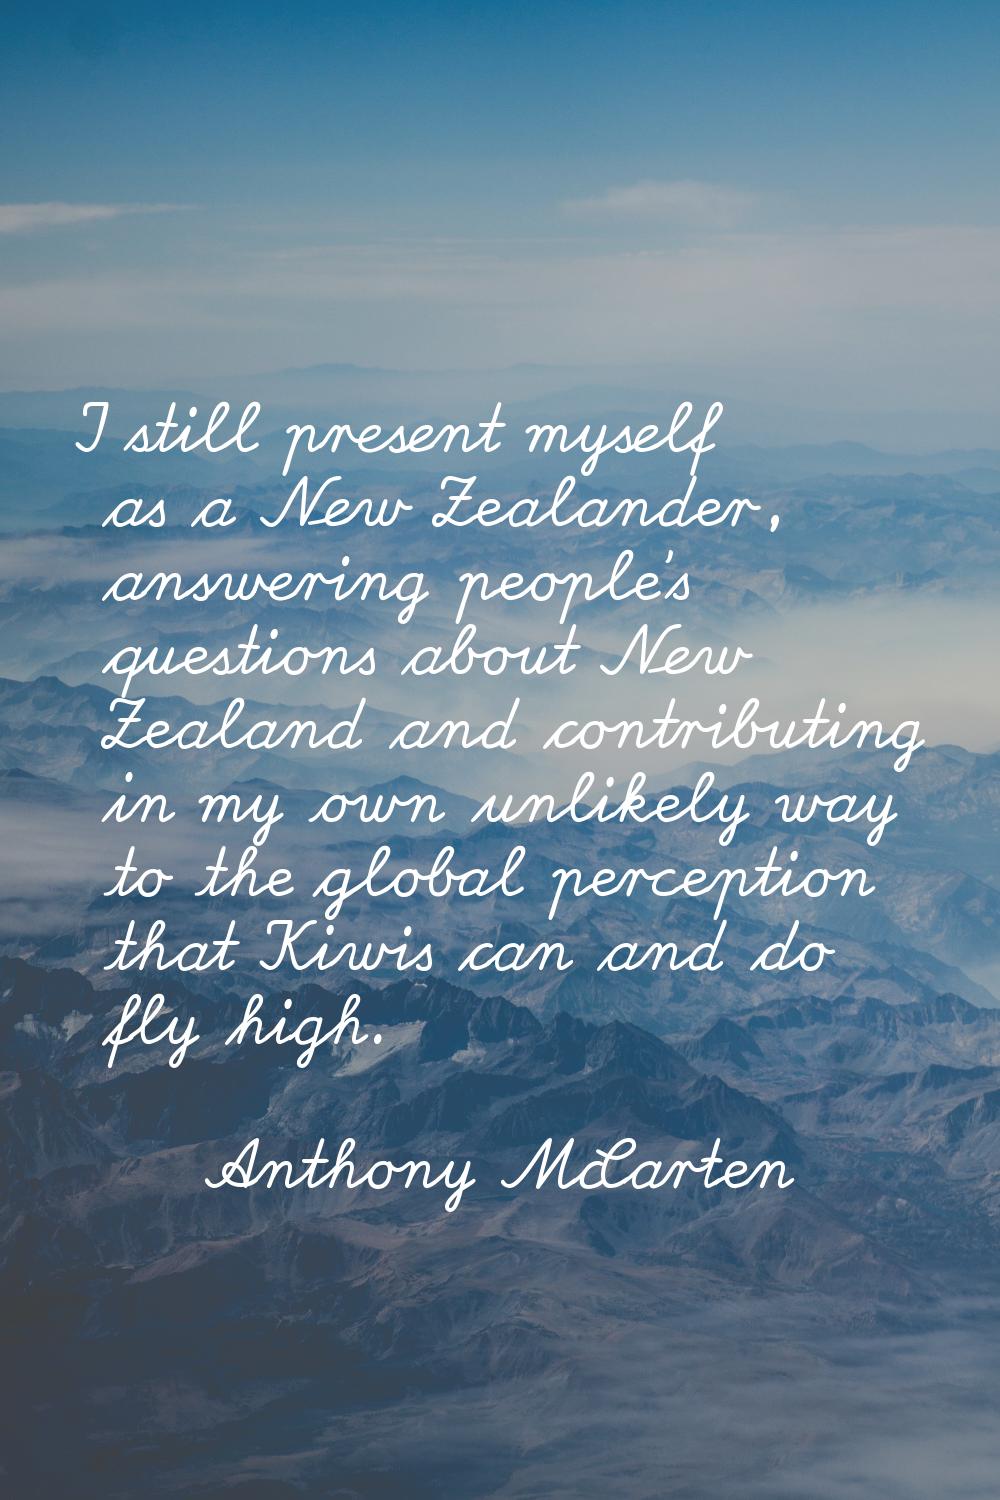 I still present myself as a New Zealander, answering people's questions about New Zealand and contr